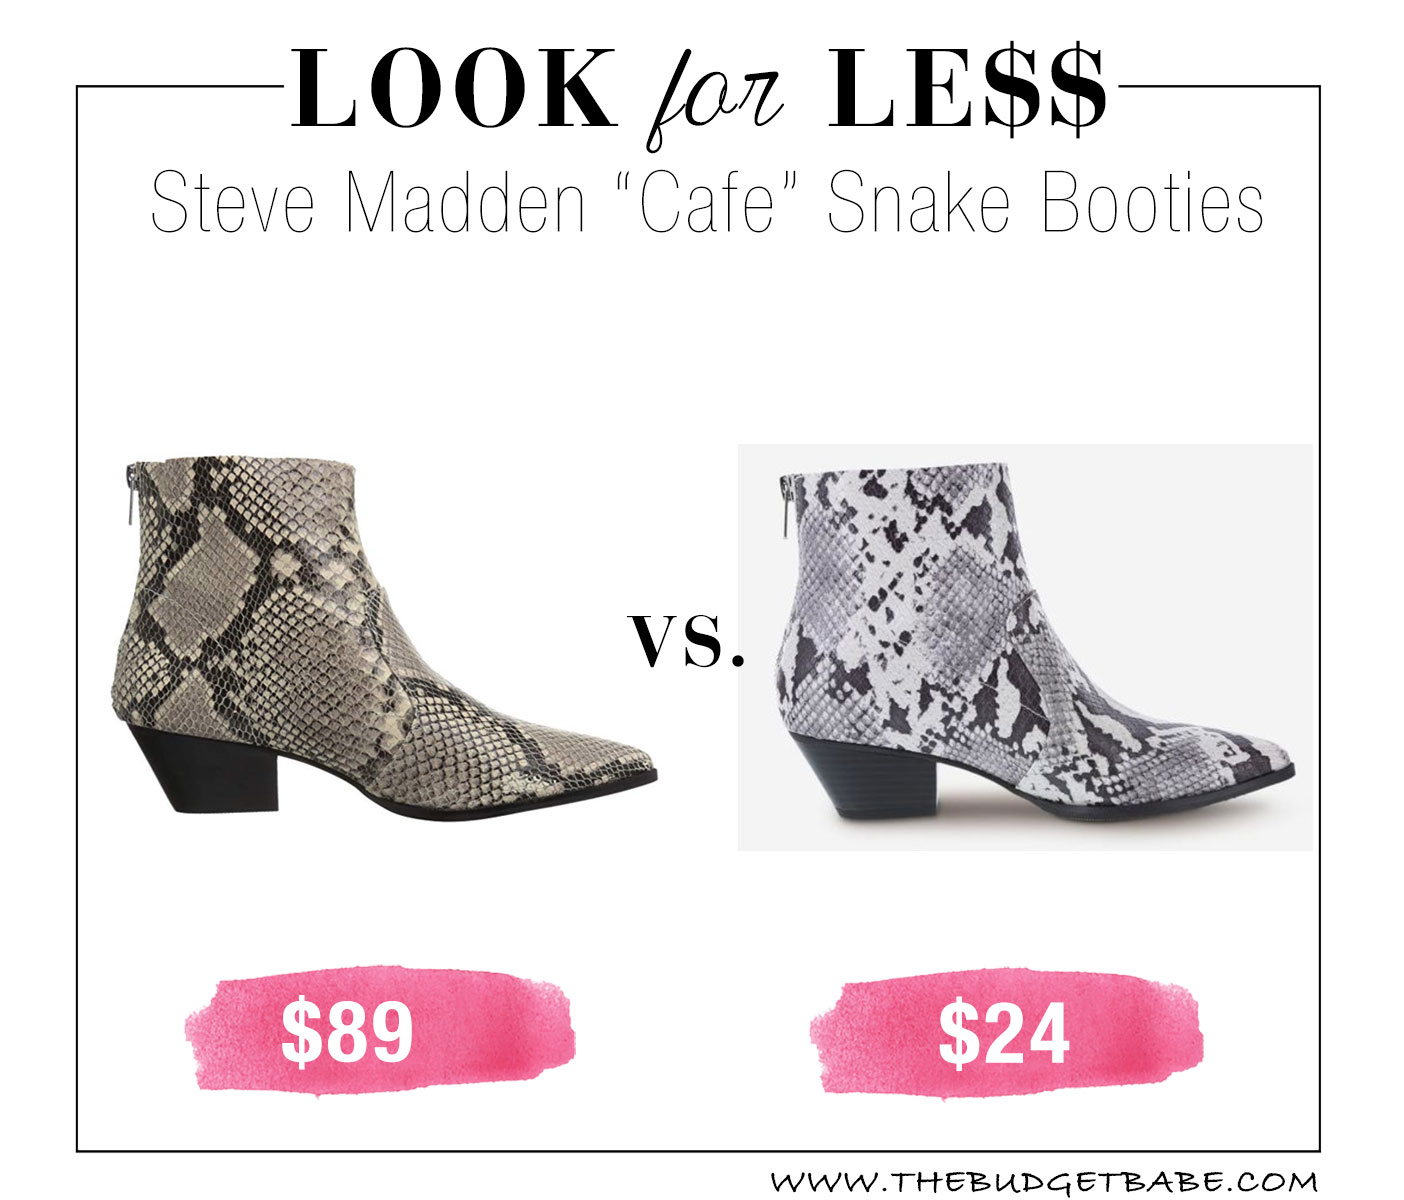 Snakeskin boot dupe at Payless!